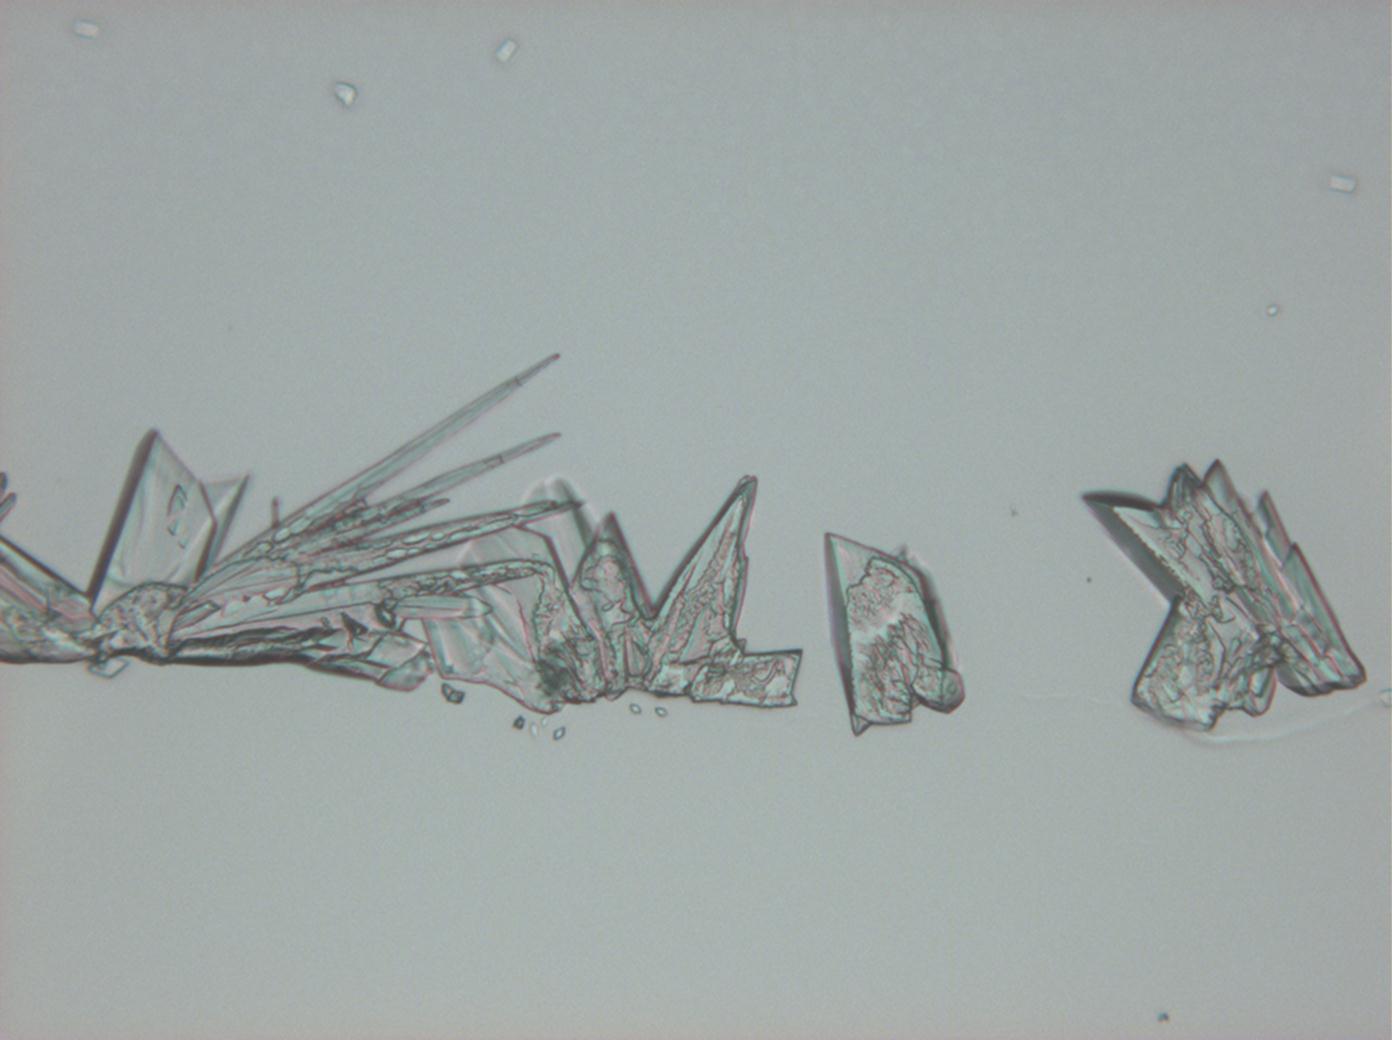 Calcium sulfate, Gypsum crystallized out of a solution in water on a glass slide